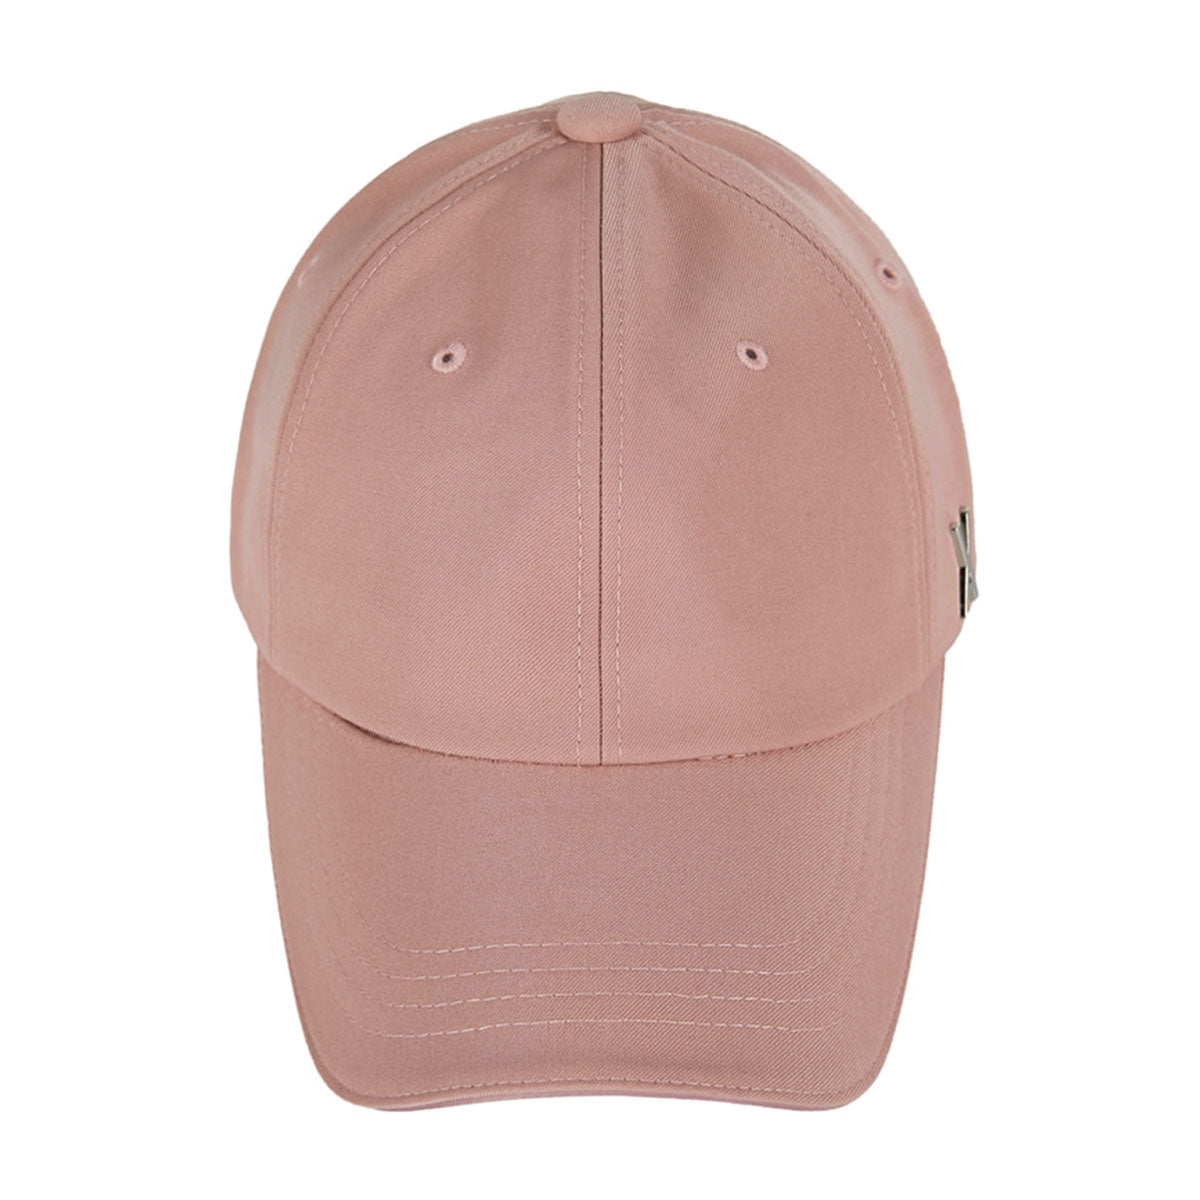 VARZAR - SILVER STUD OVER FIT BALL CAP PINK [VZR4-0006]